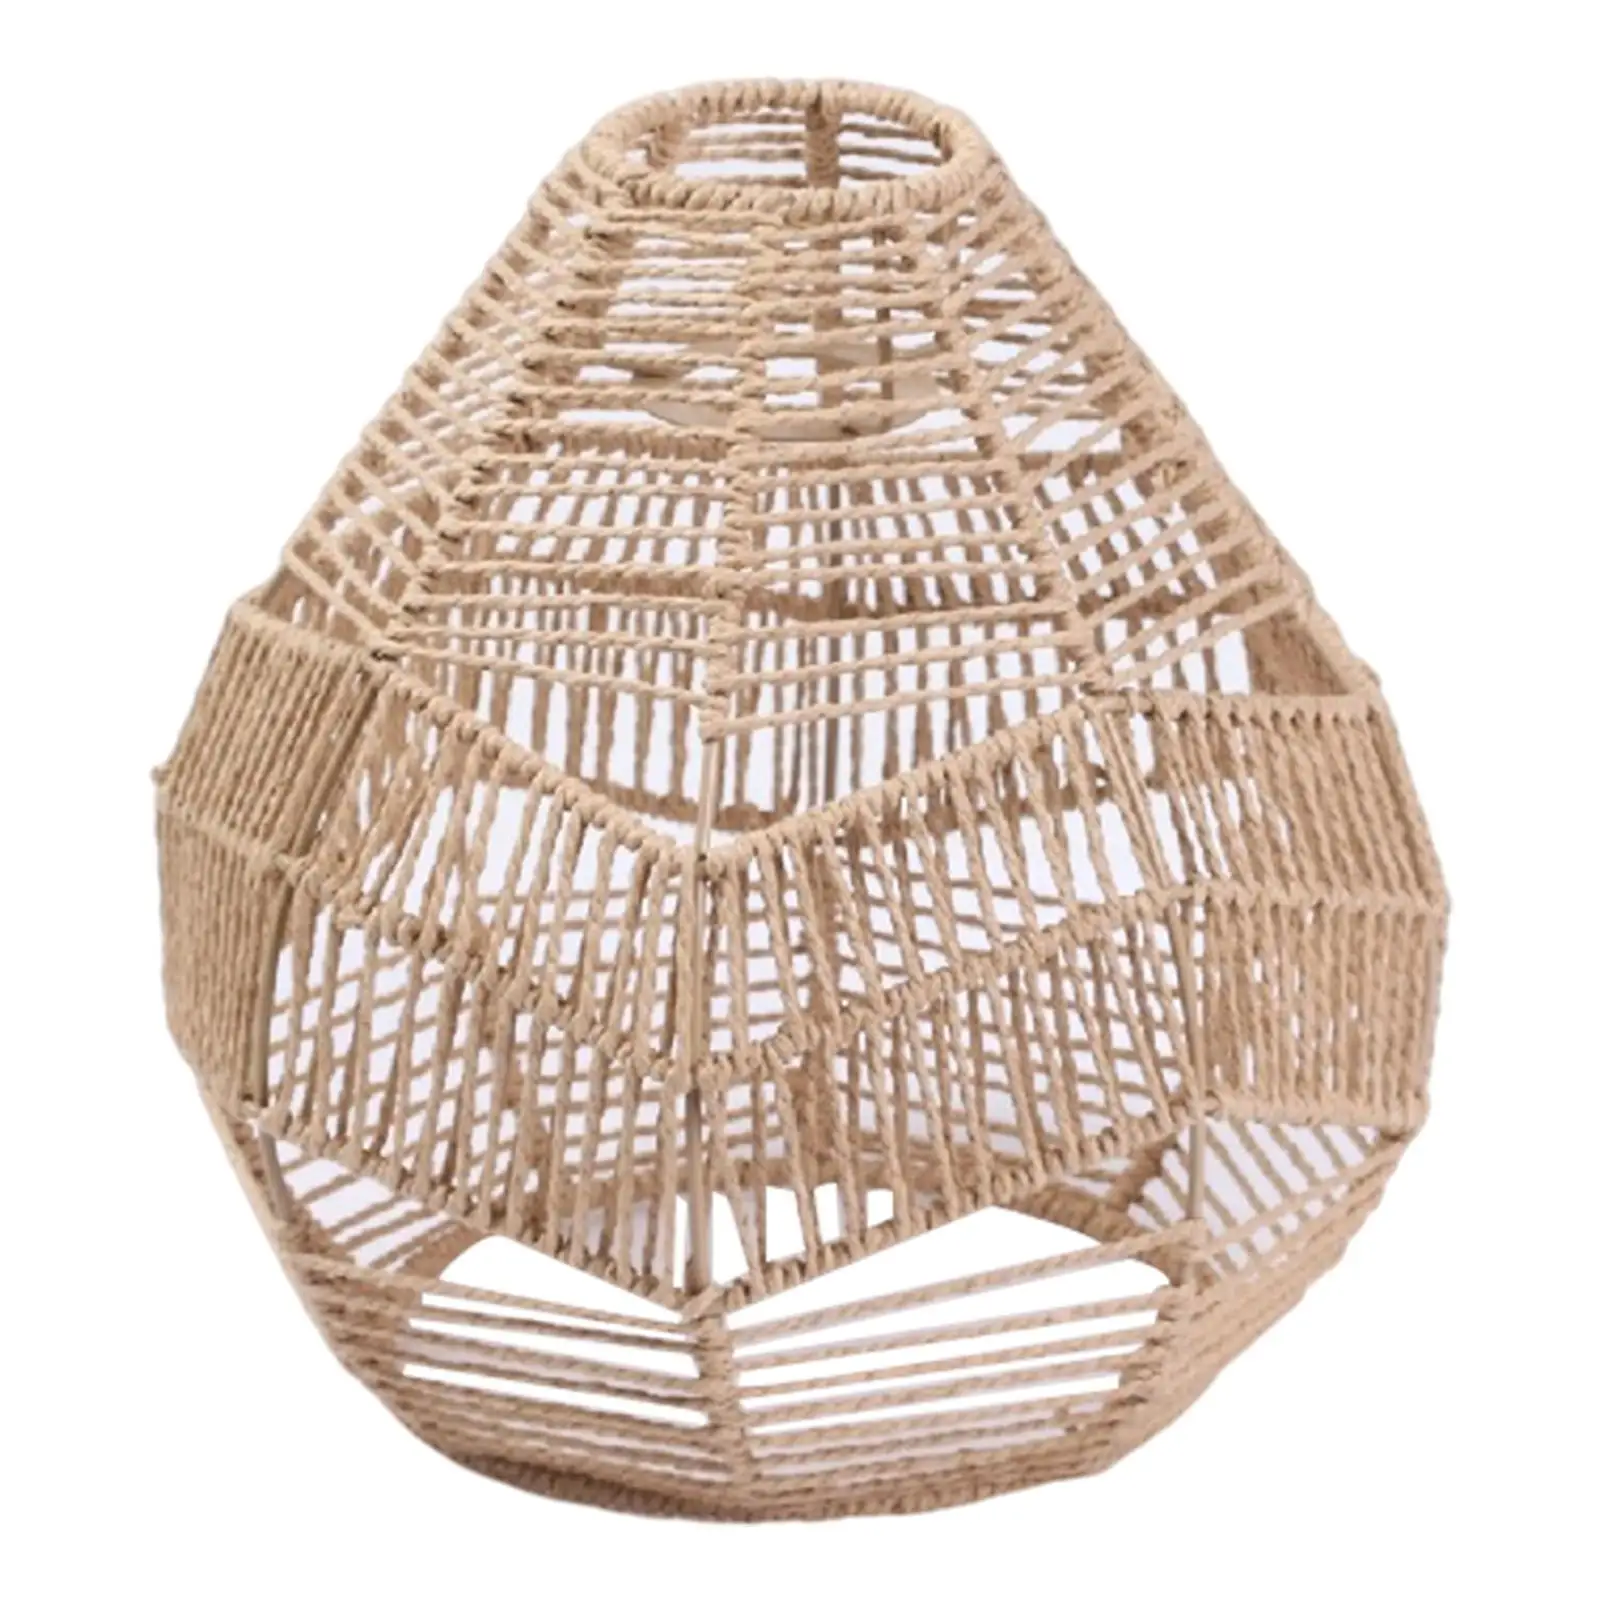 Handwoven Lamp Shade Hanging Light Fixture Cover Ceiling Light Shade Lampshade for Hotel Teahouse Living Room Decoration